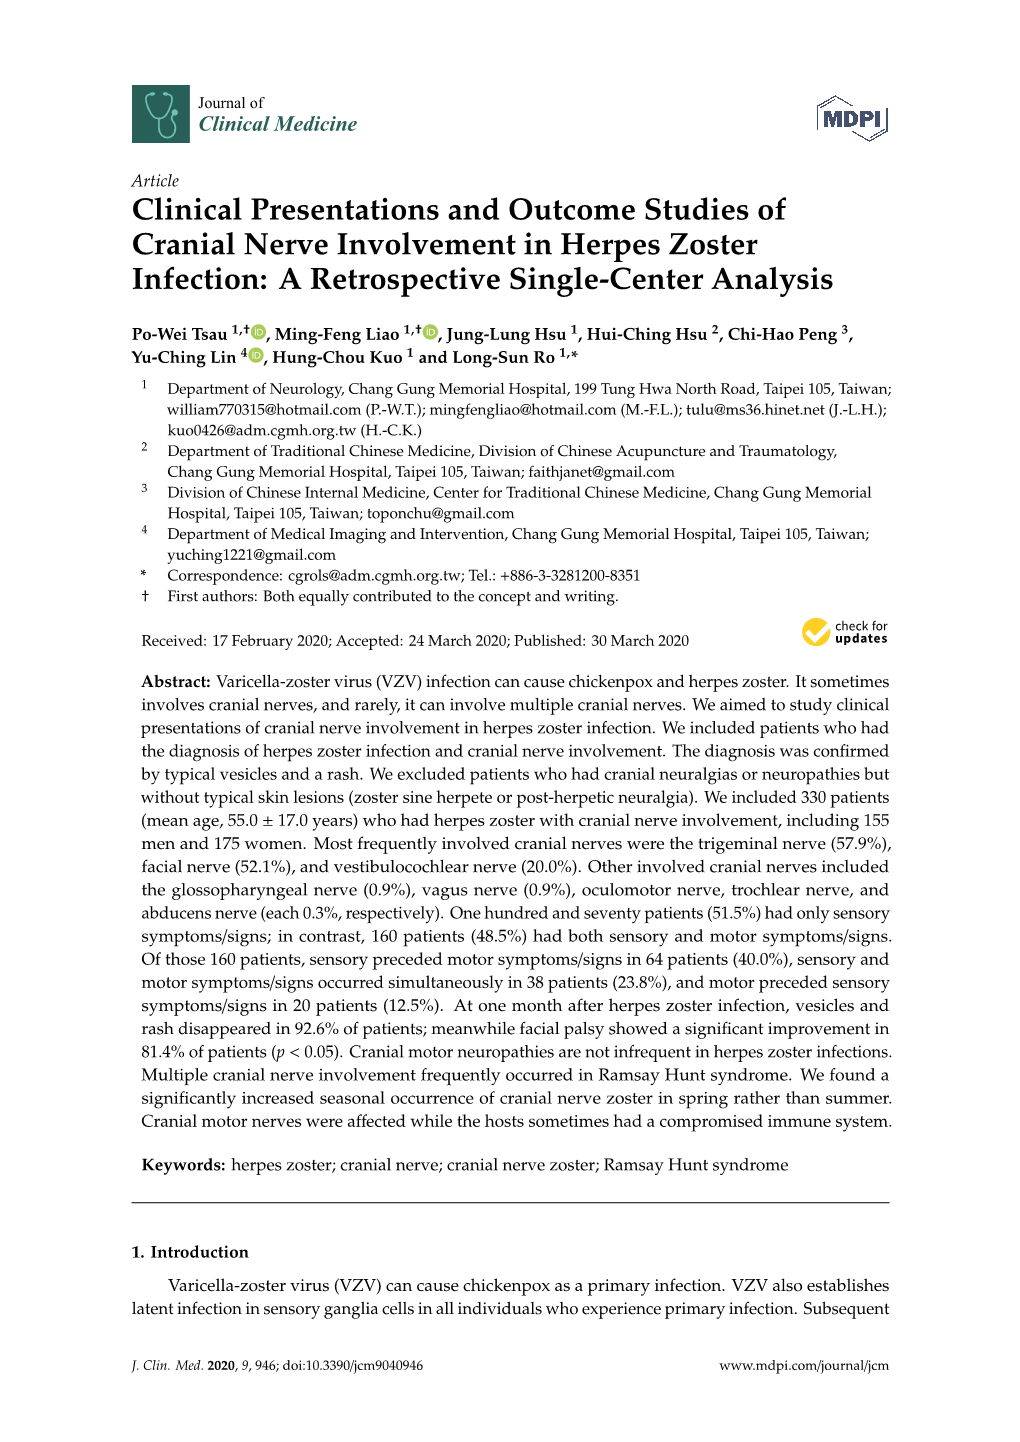 Clinical Presentations and Outcome Studies of Cranial Nerve Involvement in Herpes Zoster Infection: a Retrospective Single-Center Analysis